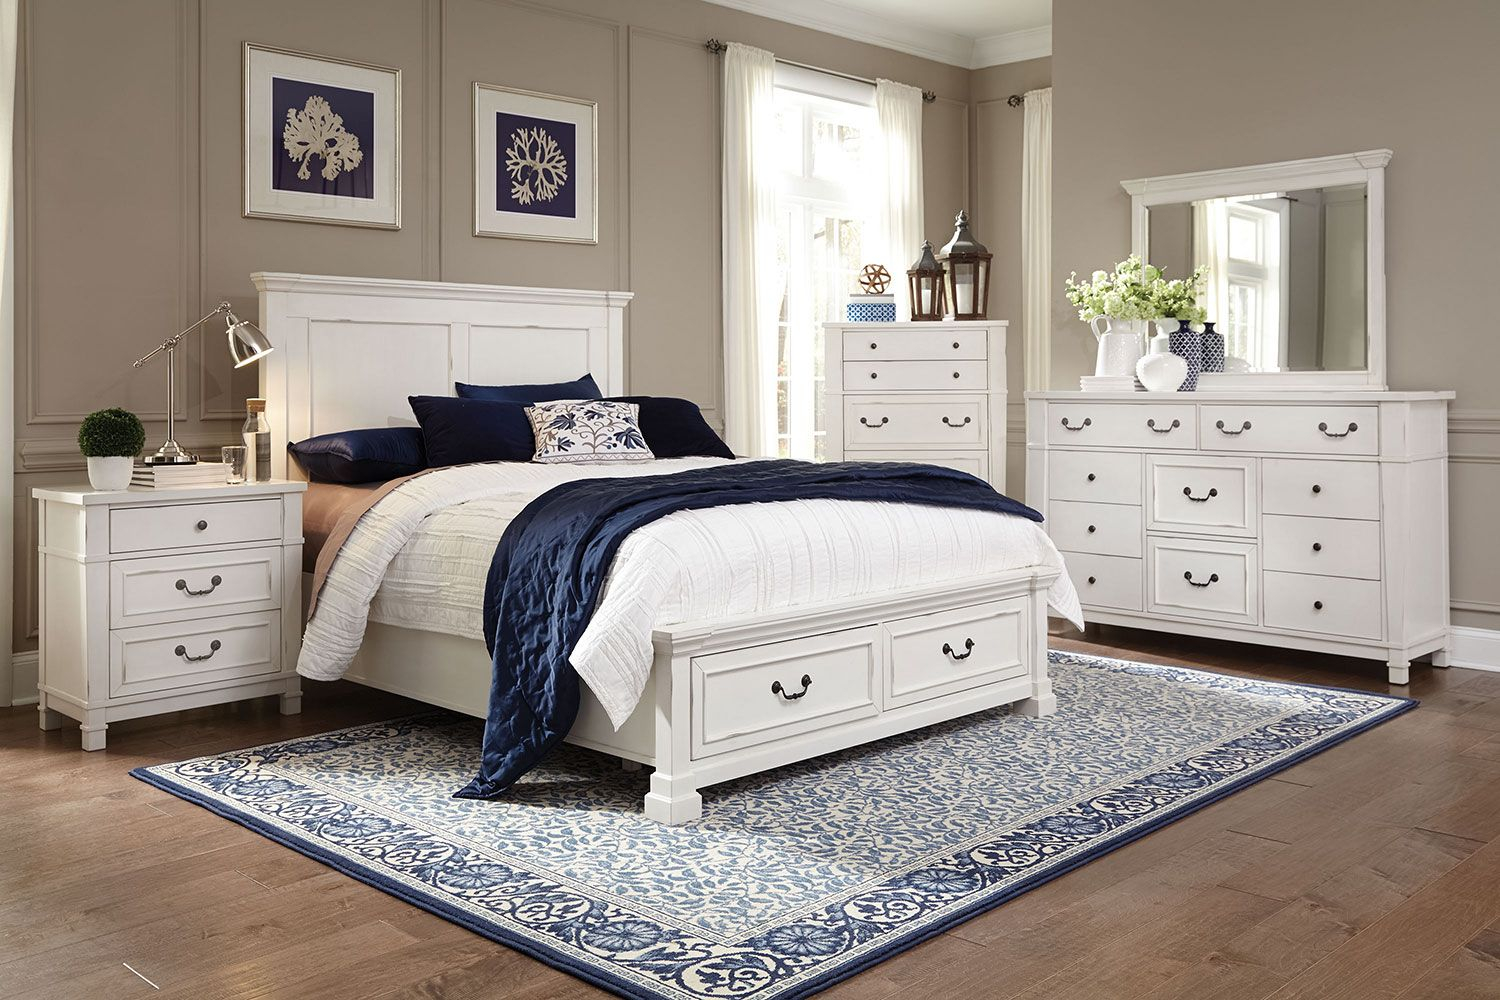 Shop At Levin'S For A Wide Selection Of Furniture And inside Levin Furniture Mattress Sale